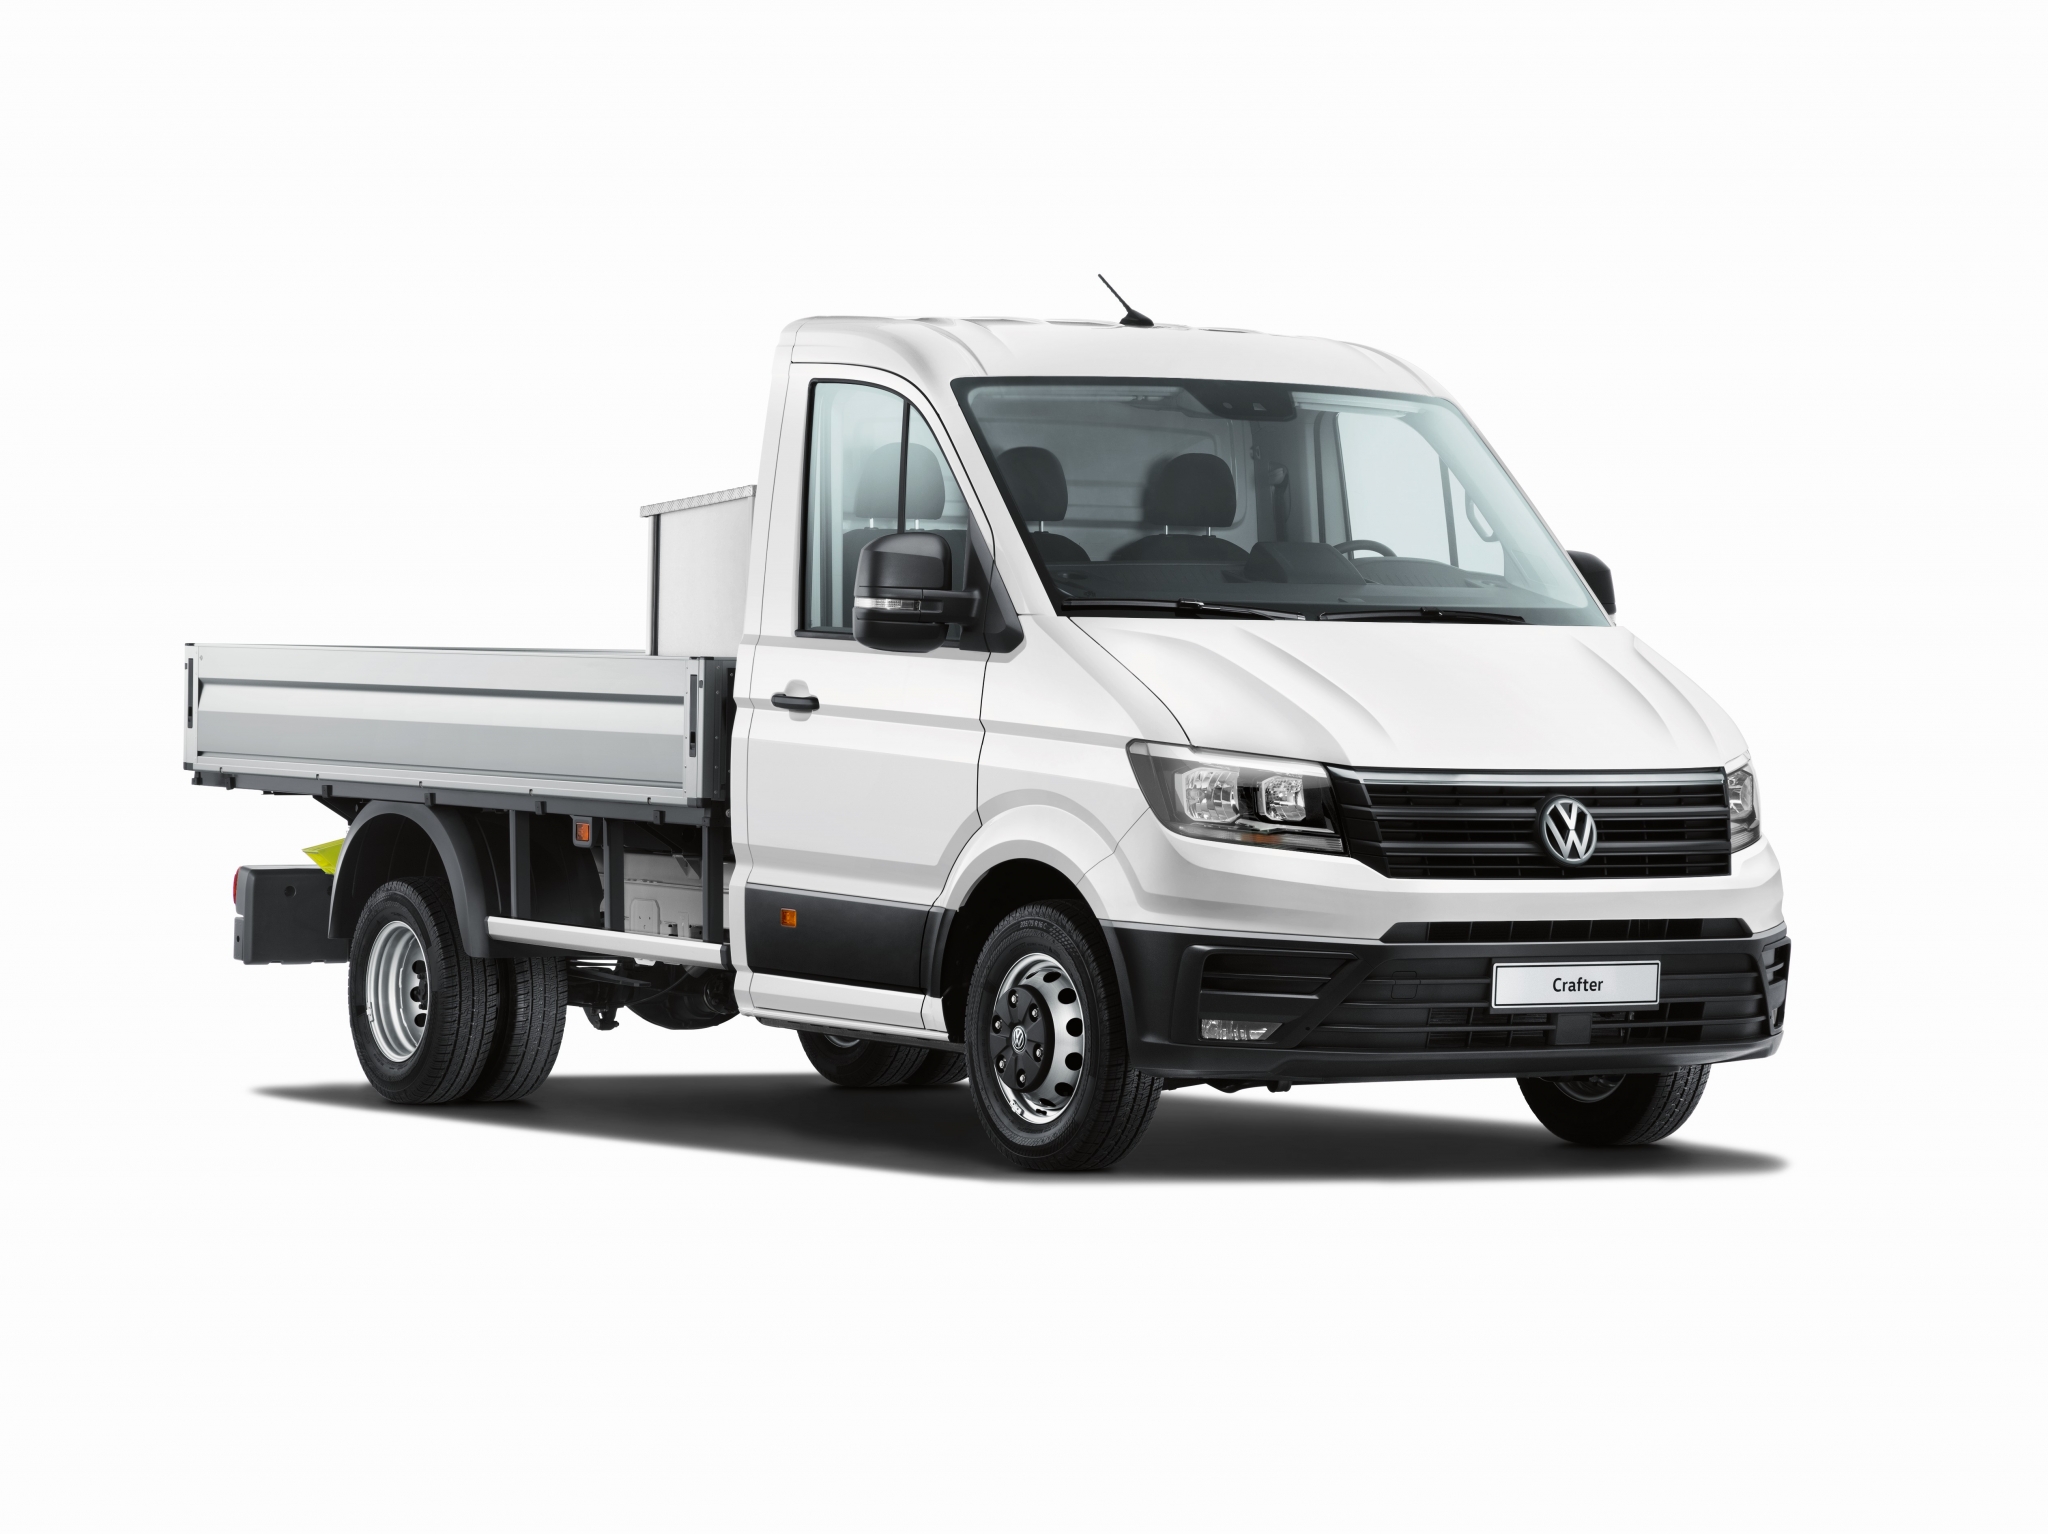 Giti gets 1st European LCV OE fitment with VW Crafter